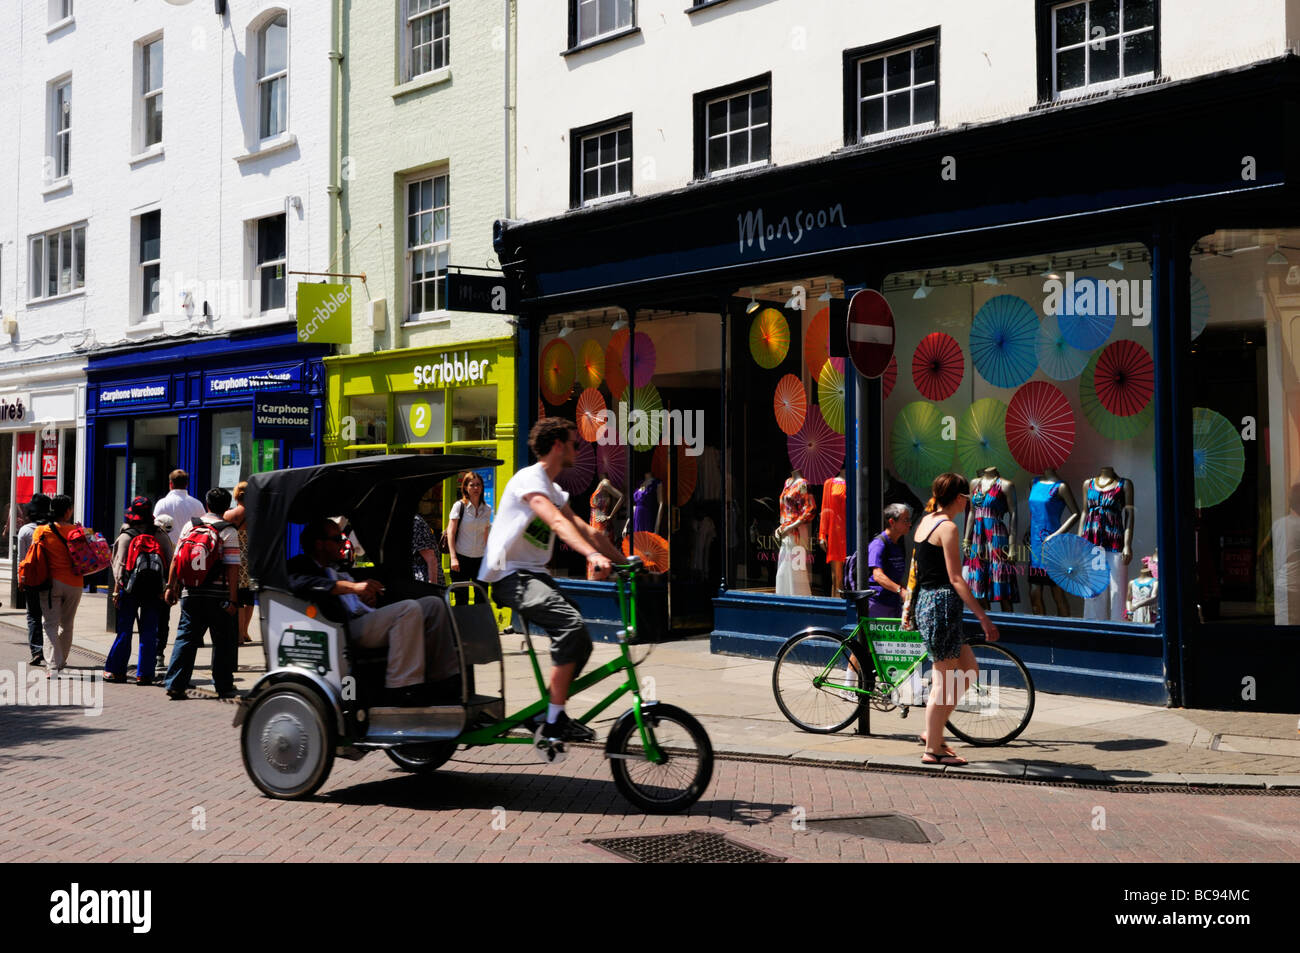 A pedicab cycle rickshaw carrying tourists in  Market Street in the city centre, Cambridge England UK Stock Photo